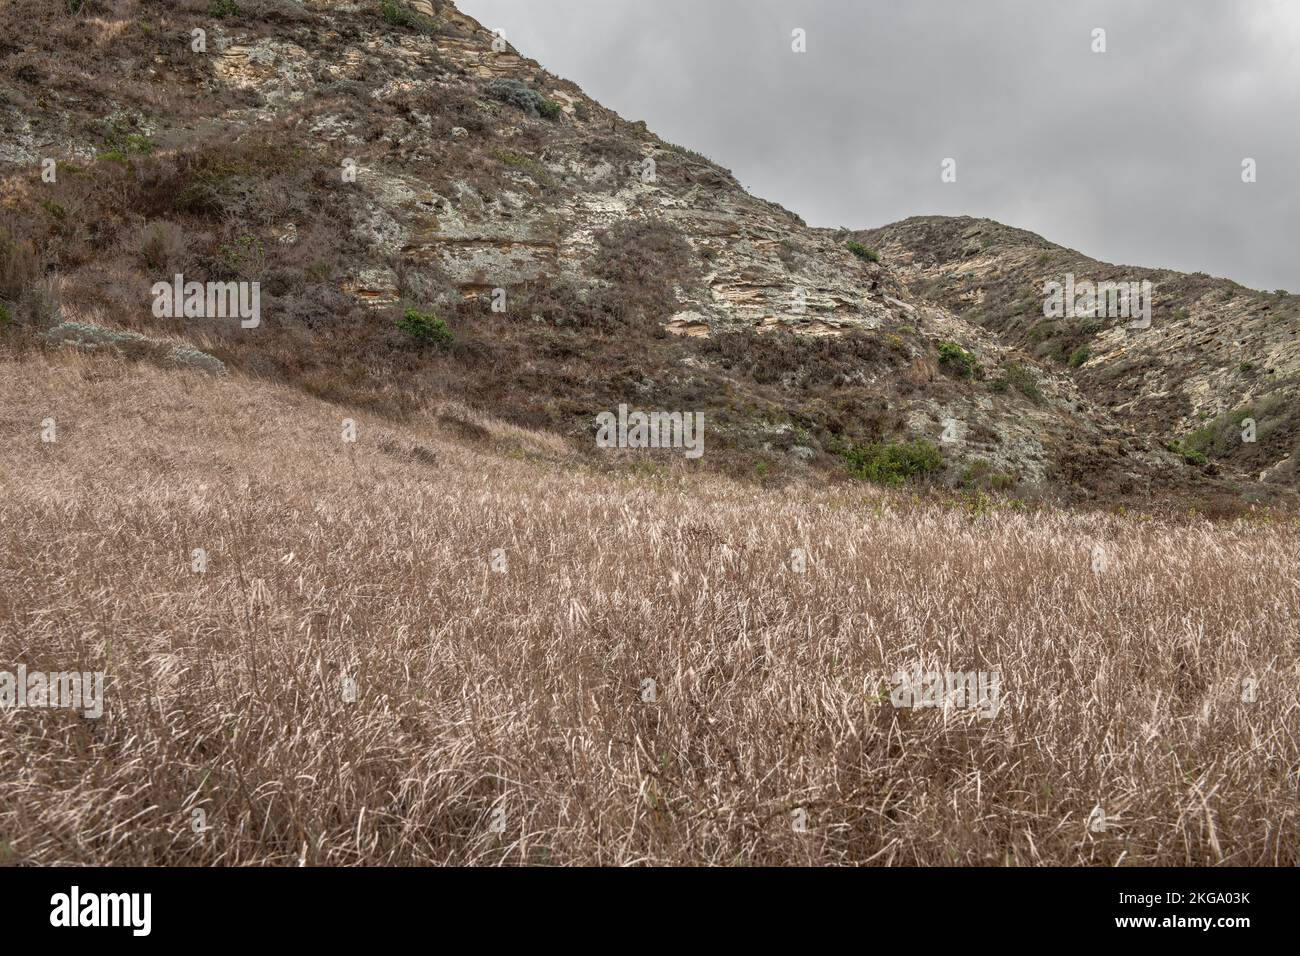 A dreary image of an arid part of Santa Rosa Island off the coast of California showing the dried grass and rugged cliffside. Stock Photo